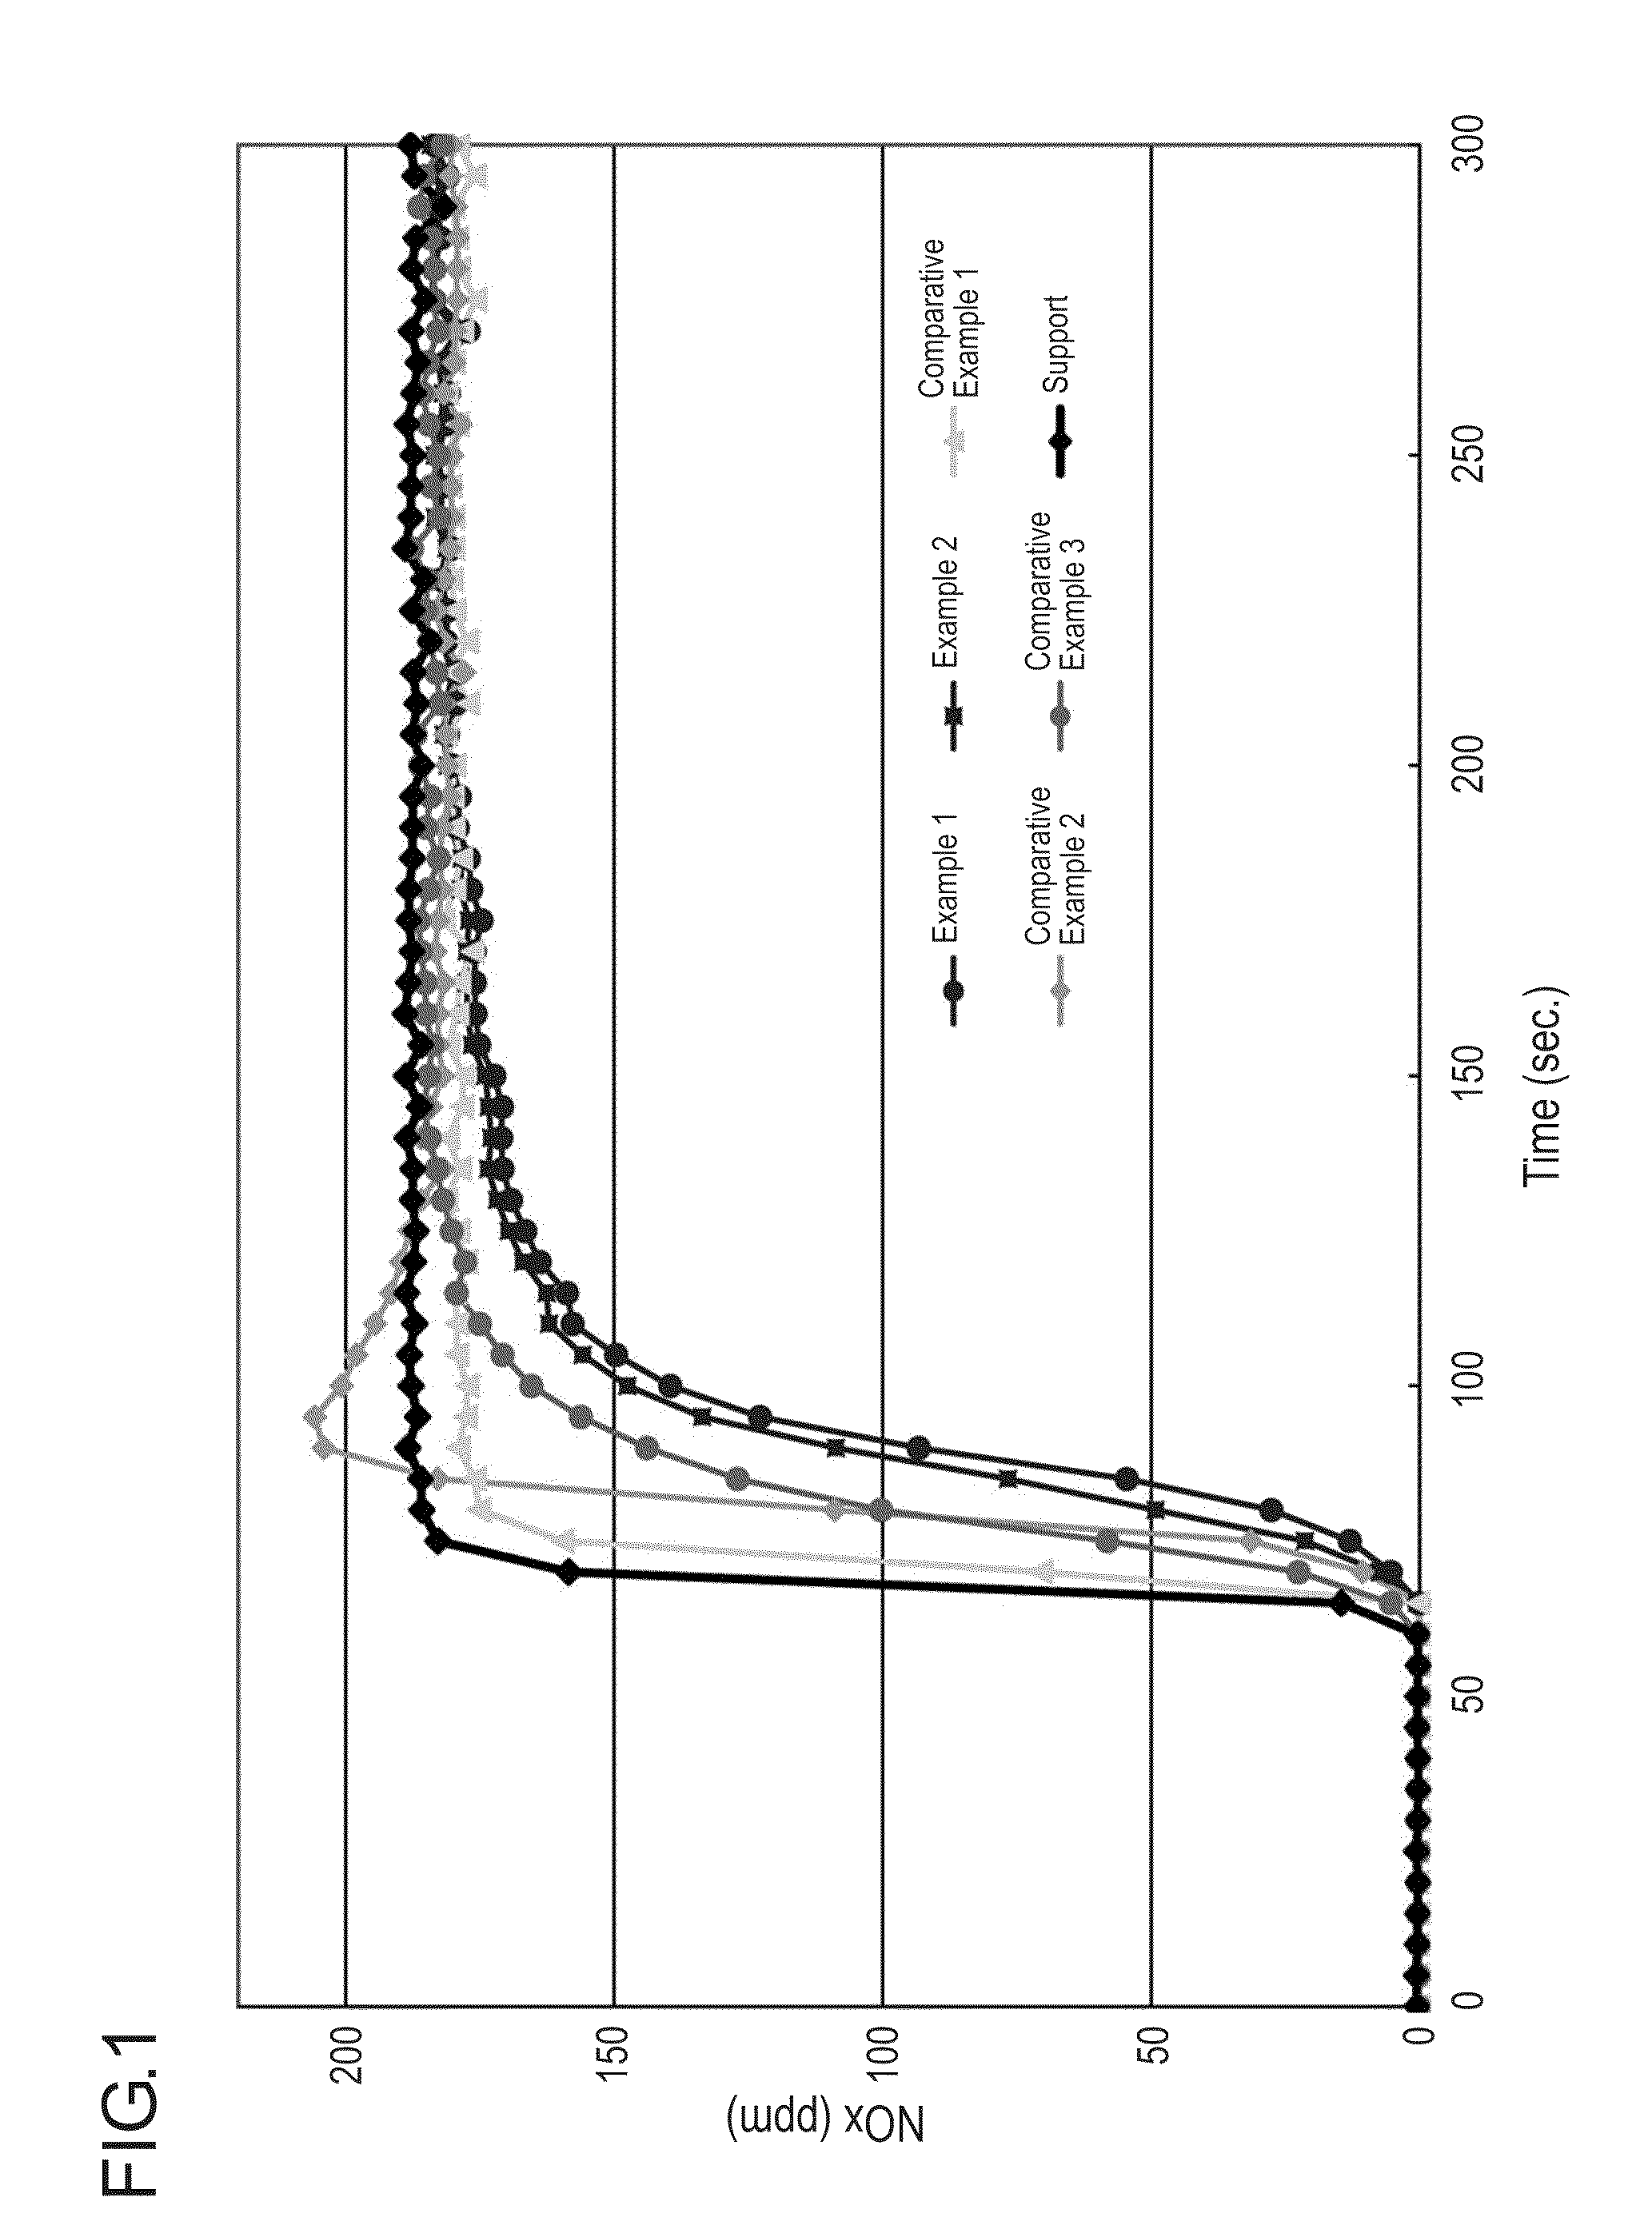 Catalyst for the removal of nitrogen oxides and method for the removal of nitrogen oxides with the same